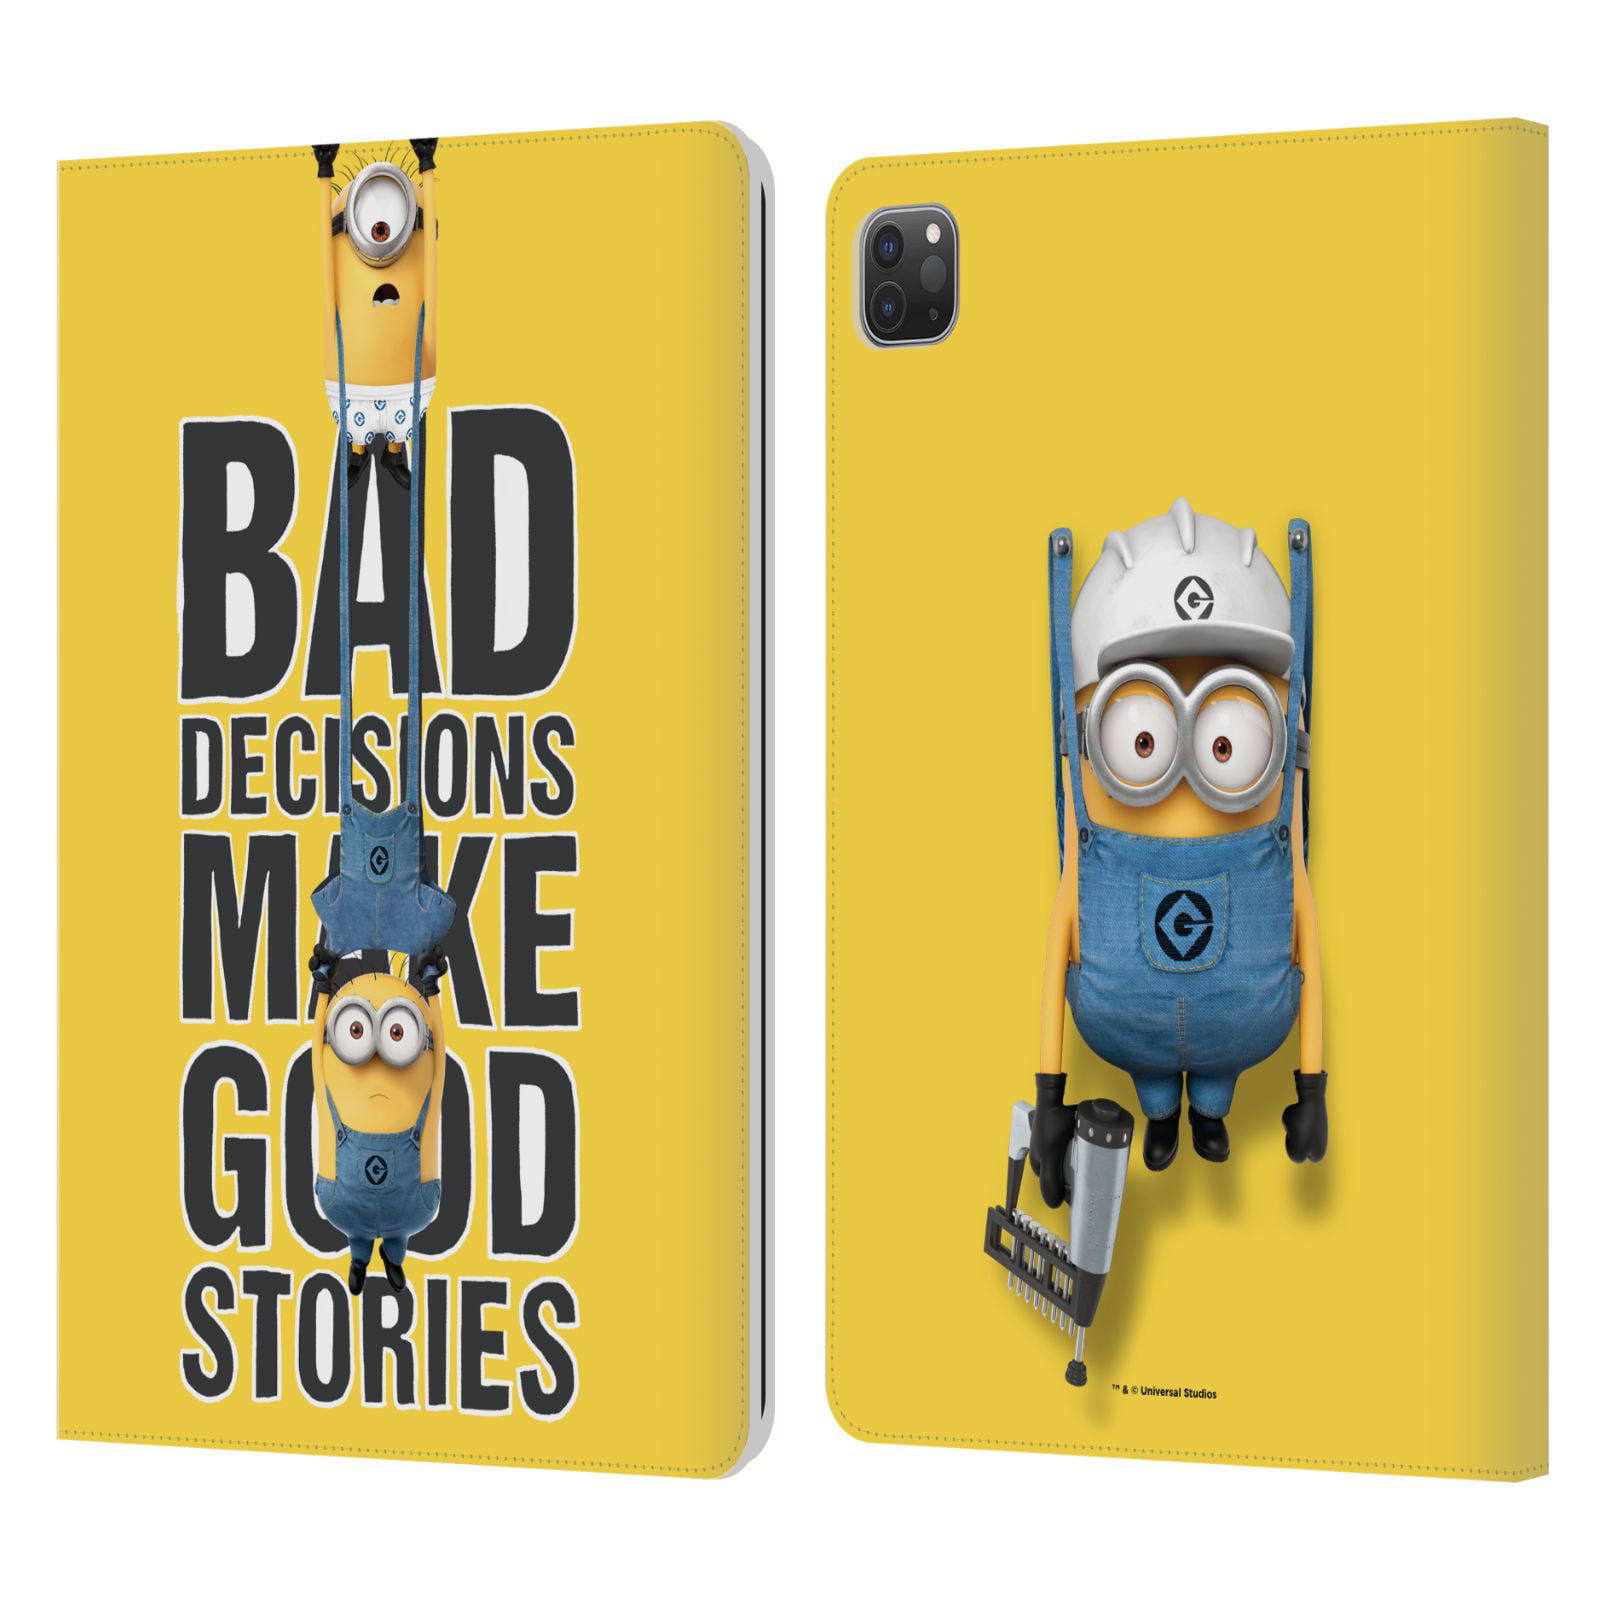 Official Despicable Me Minions Back to School Wallets Duvet Bags Umbrellas Gifts 